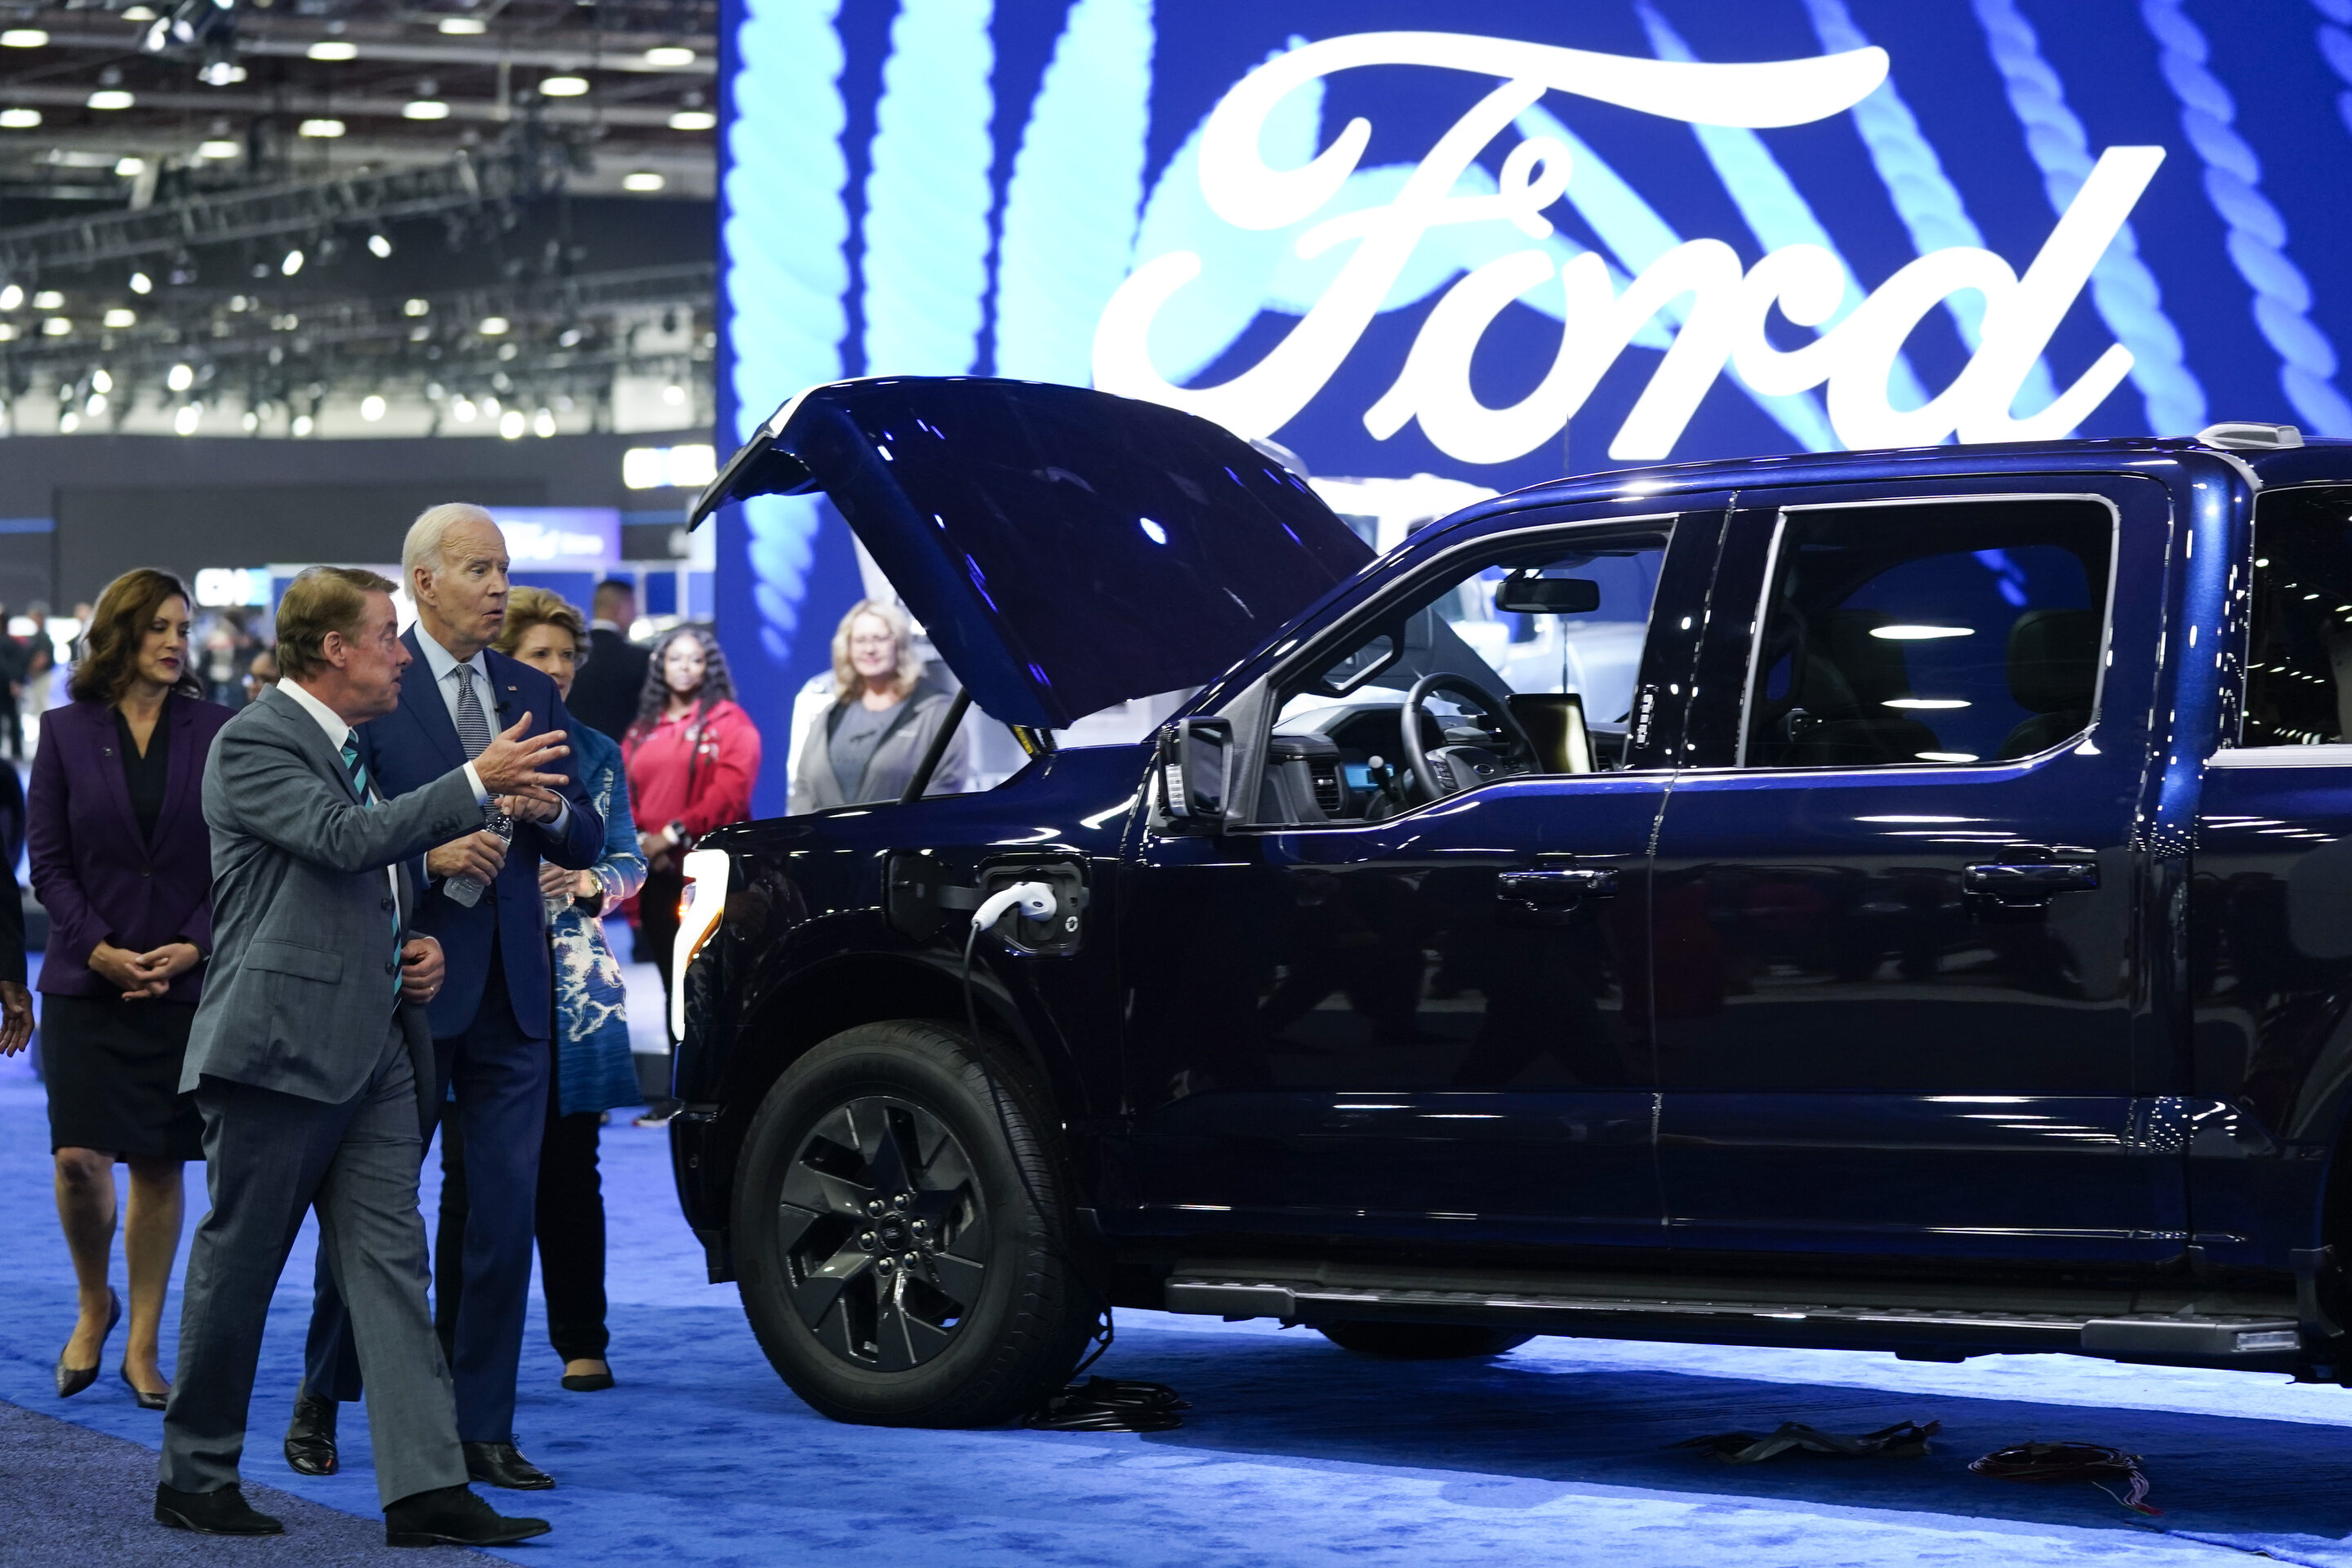 Detroit Auto Show attendance figures won't be released this year